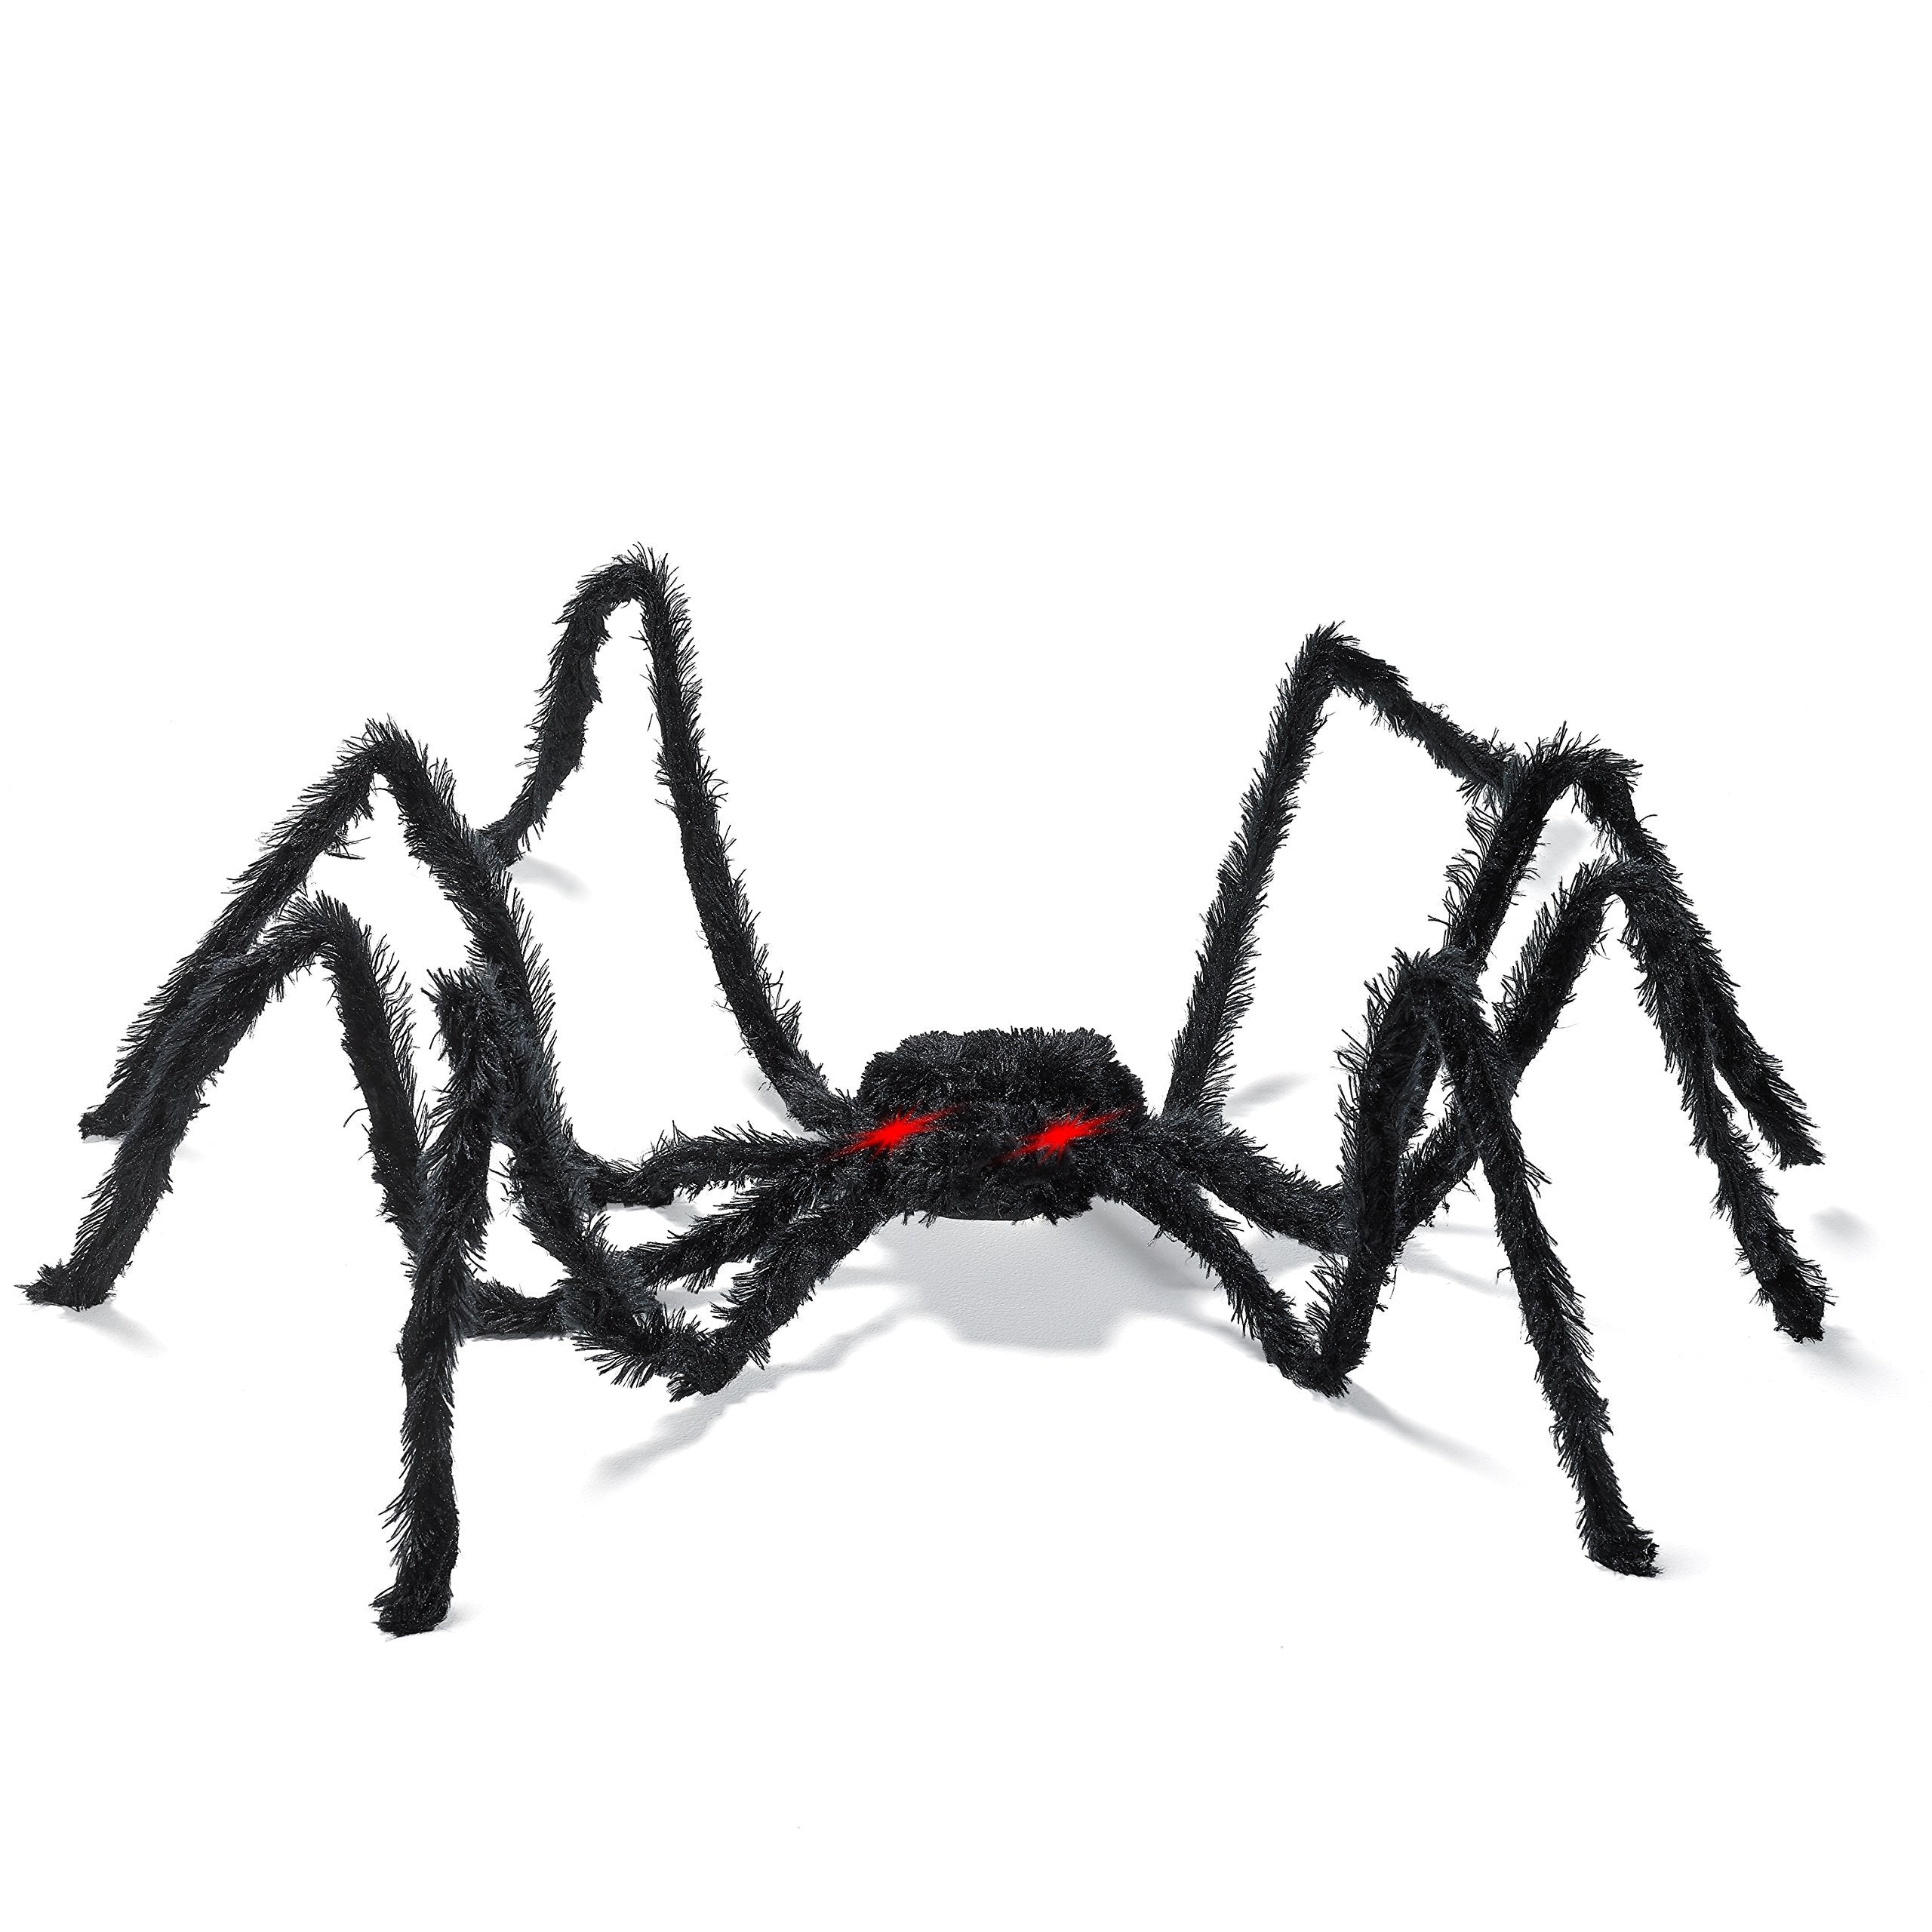 Halloween Spider with Light Up Eyes (LED Lights) - Decorations 4 Ft Hairy Spider Prop with Giant LED Red Eyes - Halloween Decor for Indoor, Outdoor, Golf Cart, Wall - Halloween Door Hanger